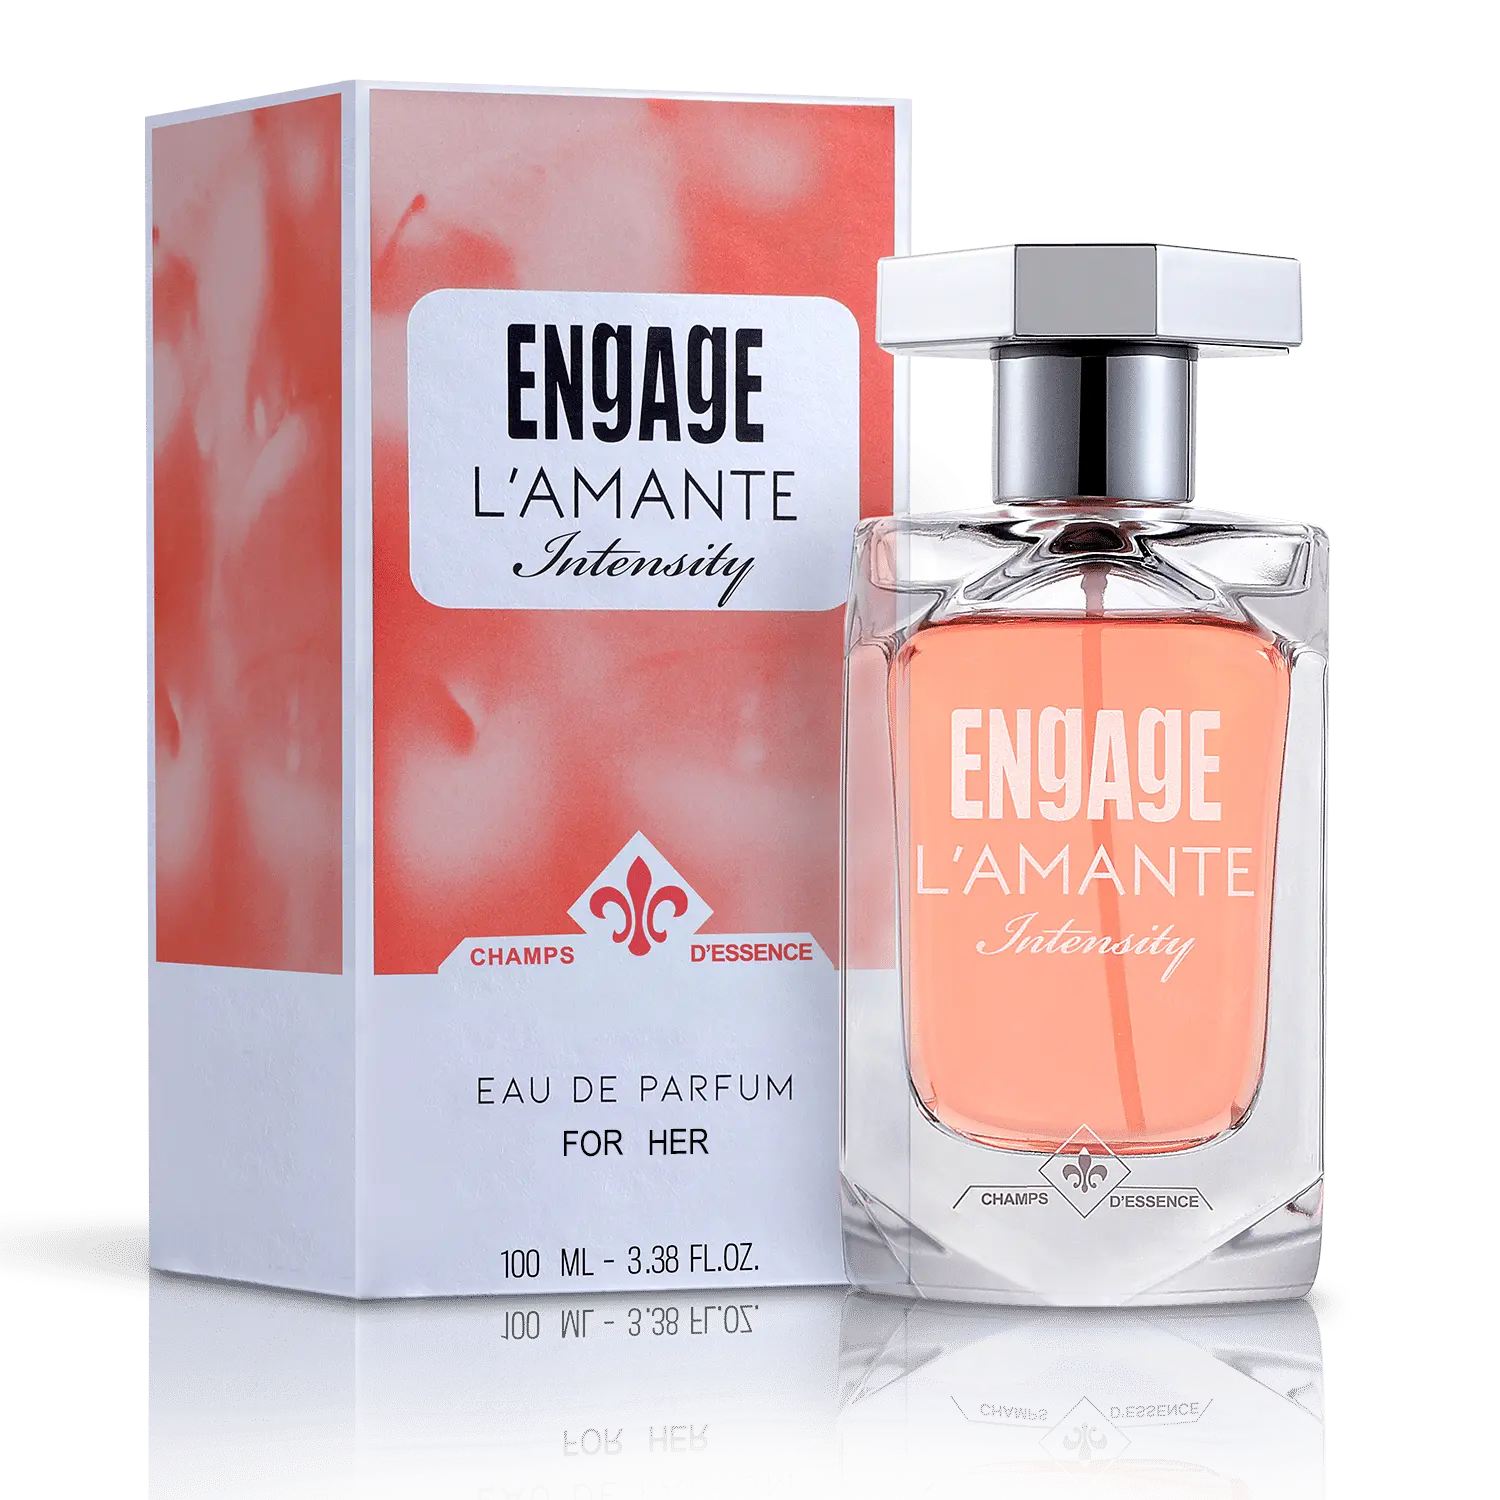 Engage L'amante Intensity EDP Perfume for Women 100ml, Woody, Premium Long Lasting Fragrance, Perfect Gift For Women, Skin Friendly, Everyday Fragrance